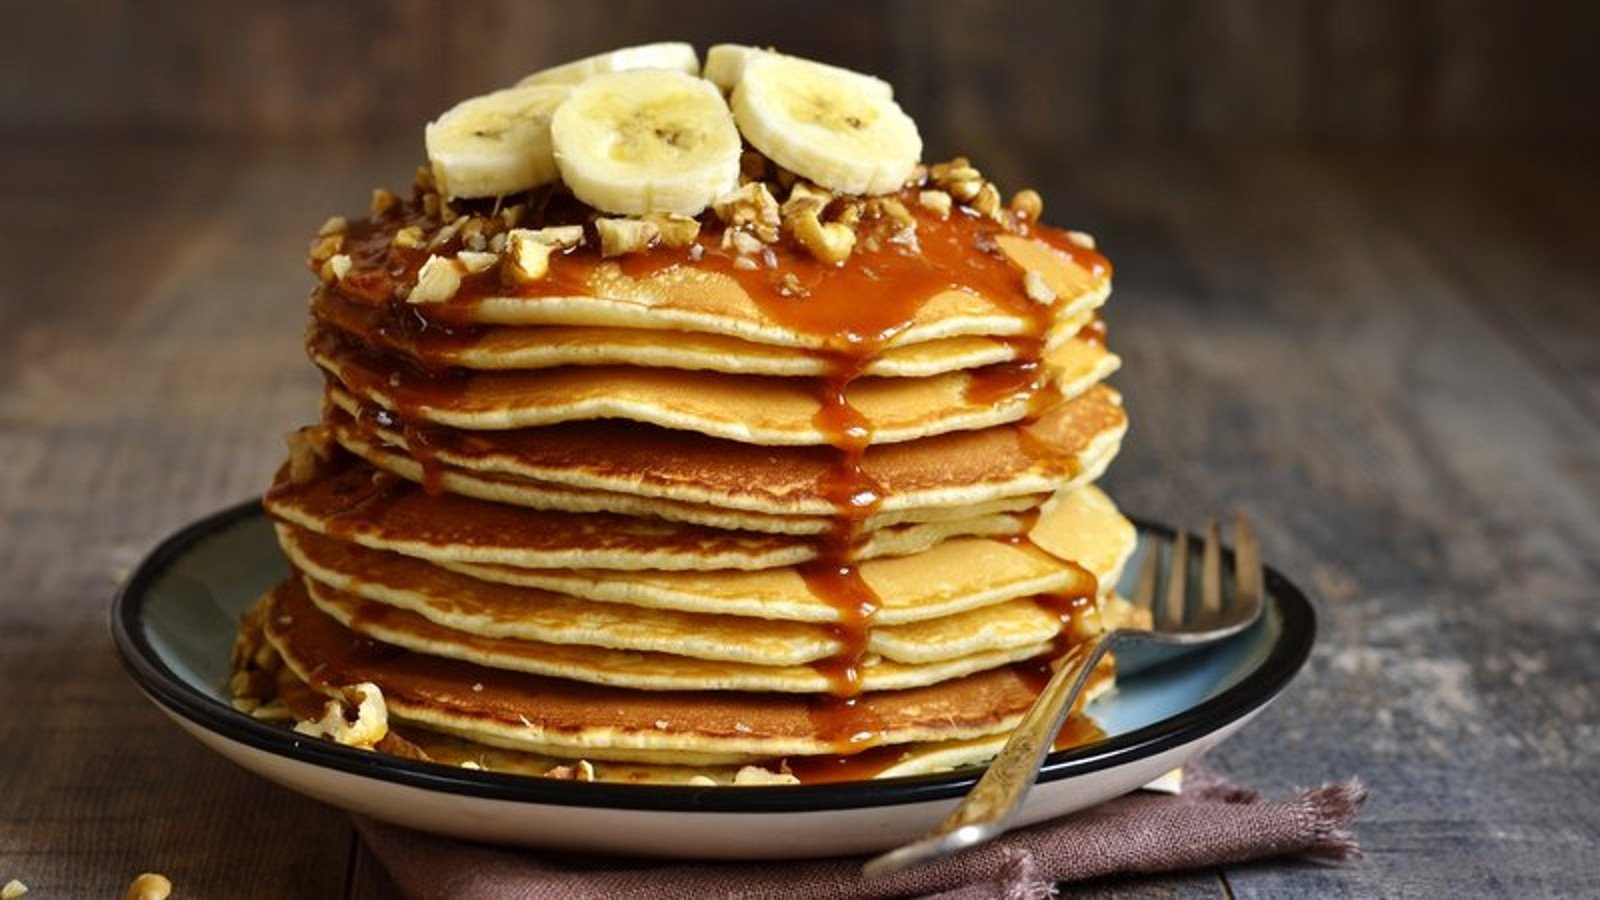 What is Shrove Tuesday and why do we eat pancakes?